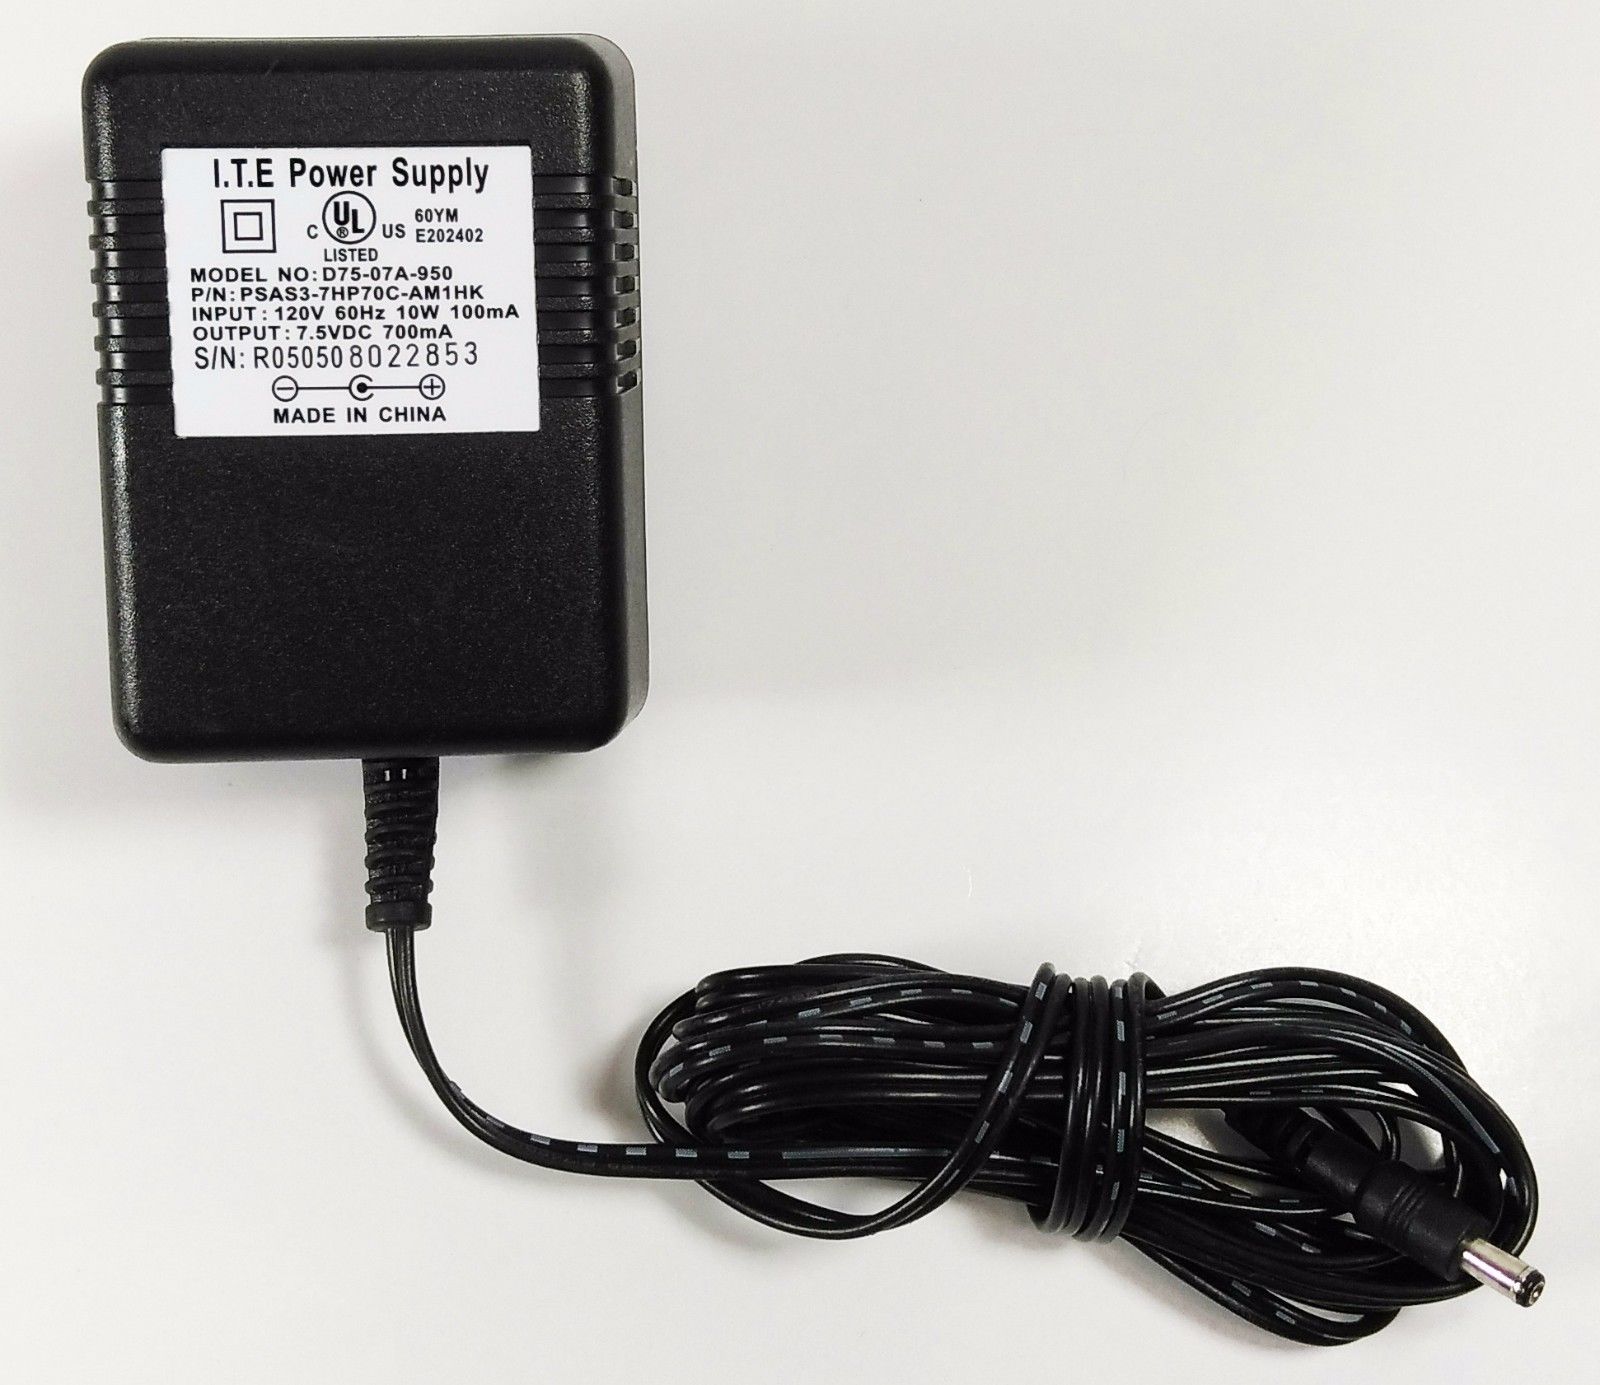 NEW 7.5V 700mA ITE D75-07A-950 PSAS3-7HP701-AM1HK AC DC Adapter